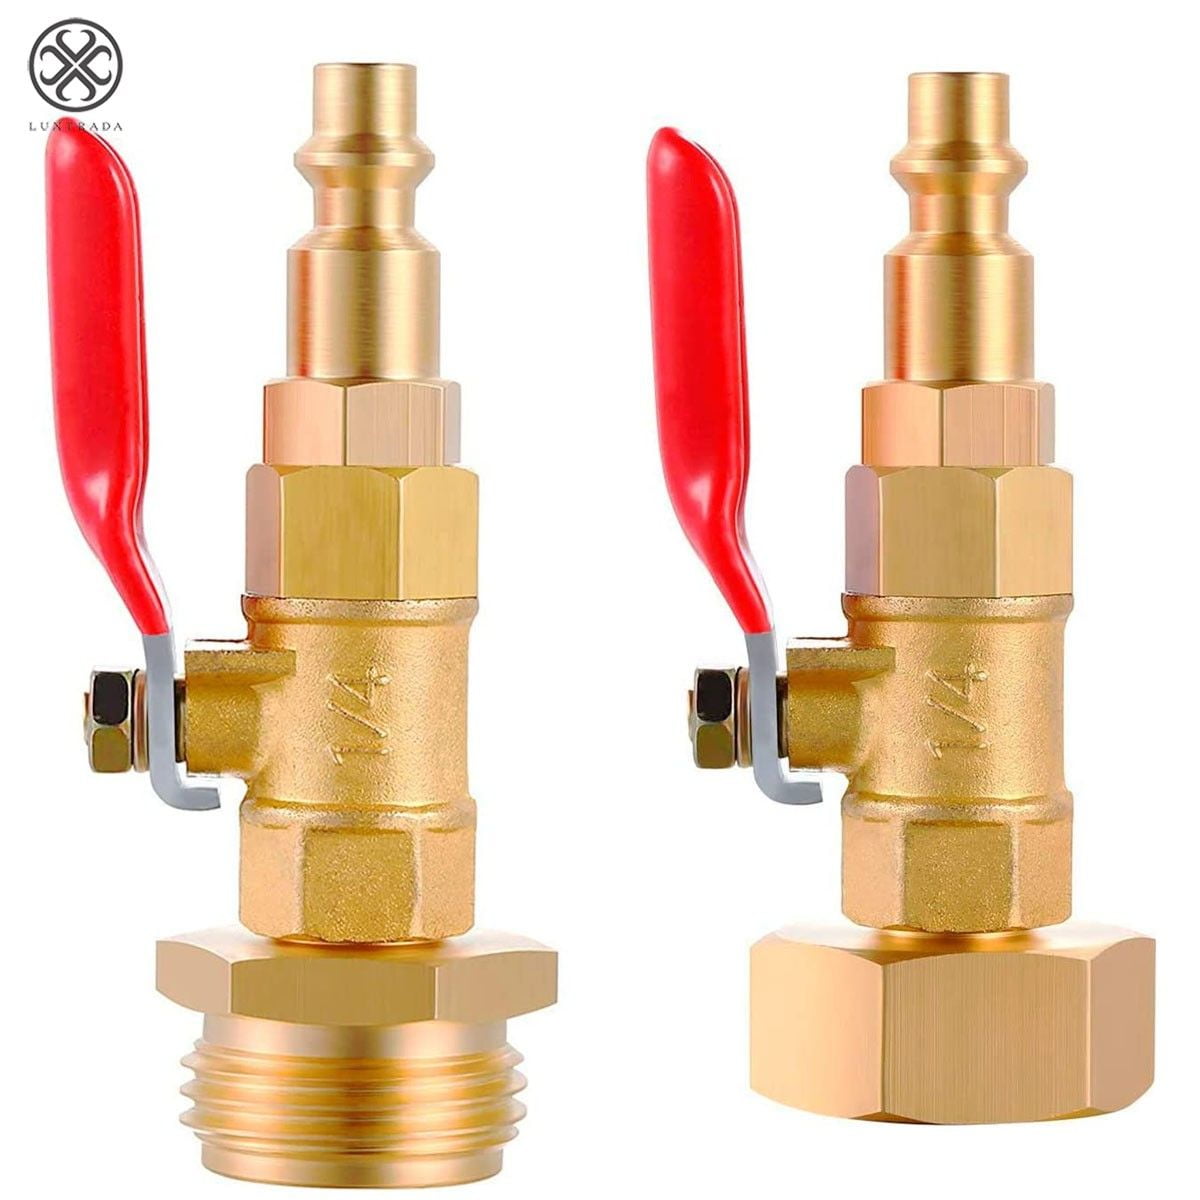 Brass Made Winterizing Quick Adapter with Ball Valve Winterize Blowout Adapter with 1/4 Inch Male Quick Connecting Plug and 3/4 Inch Male GHT Thread Easy Blow Out Water to Winterize 